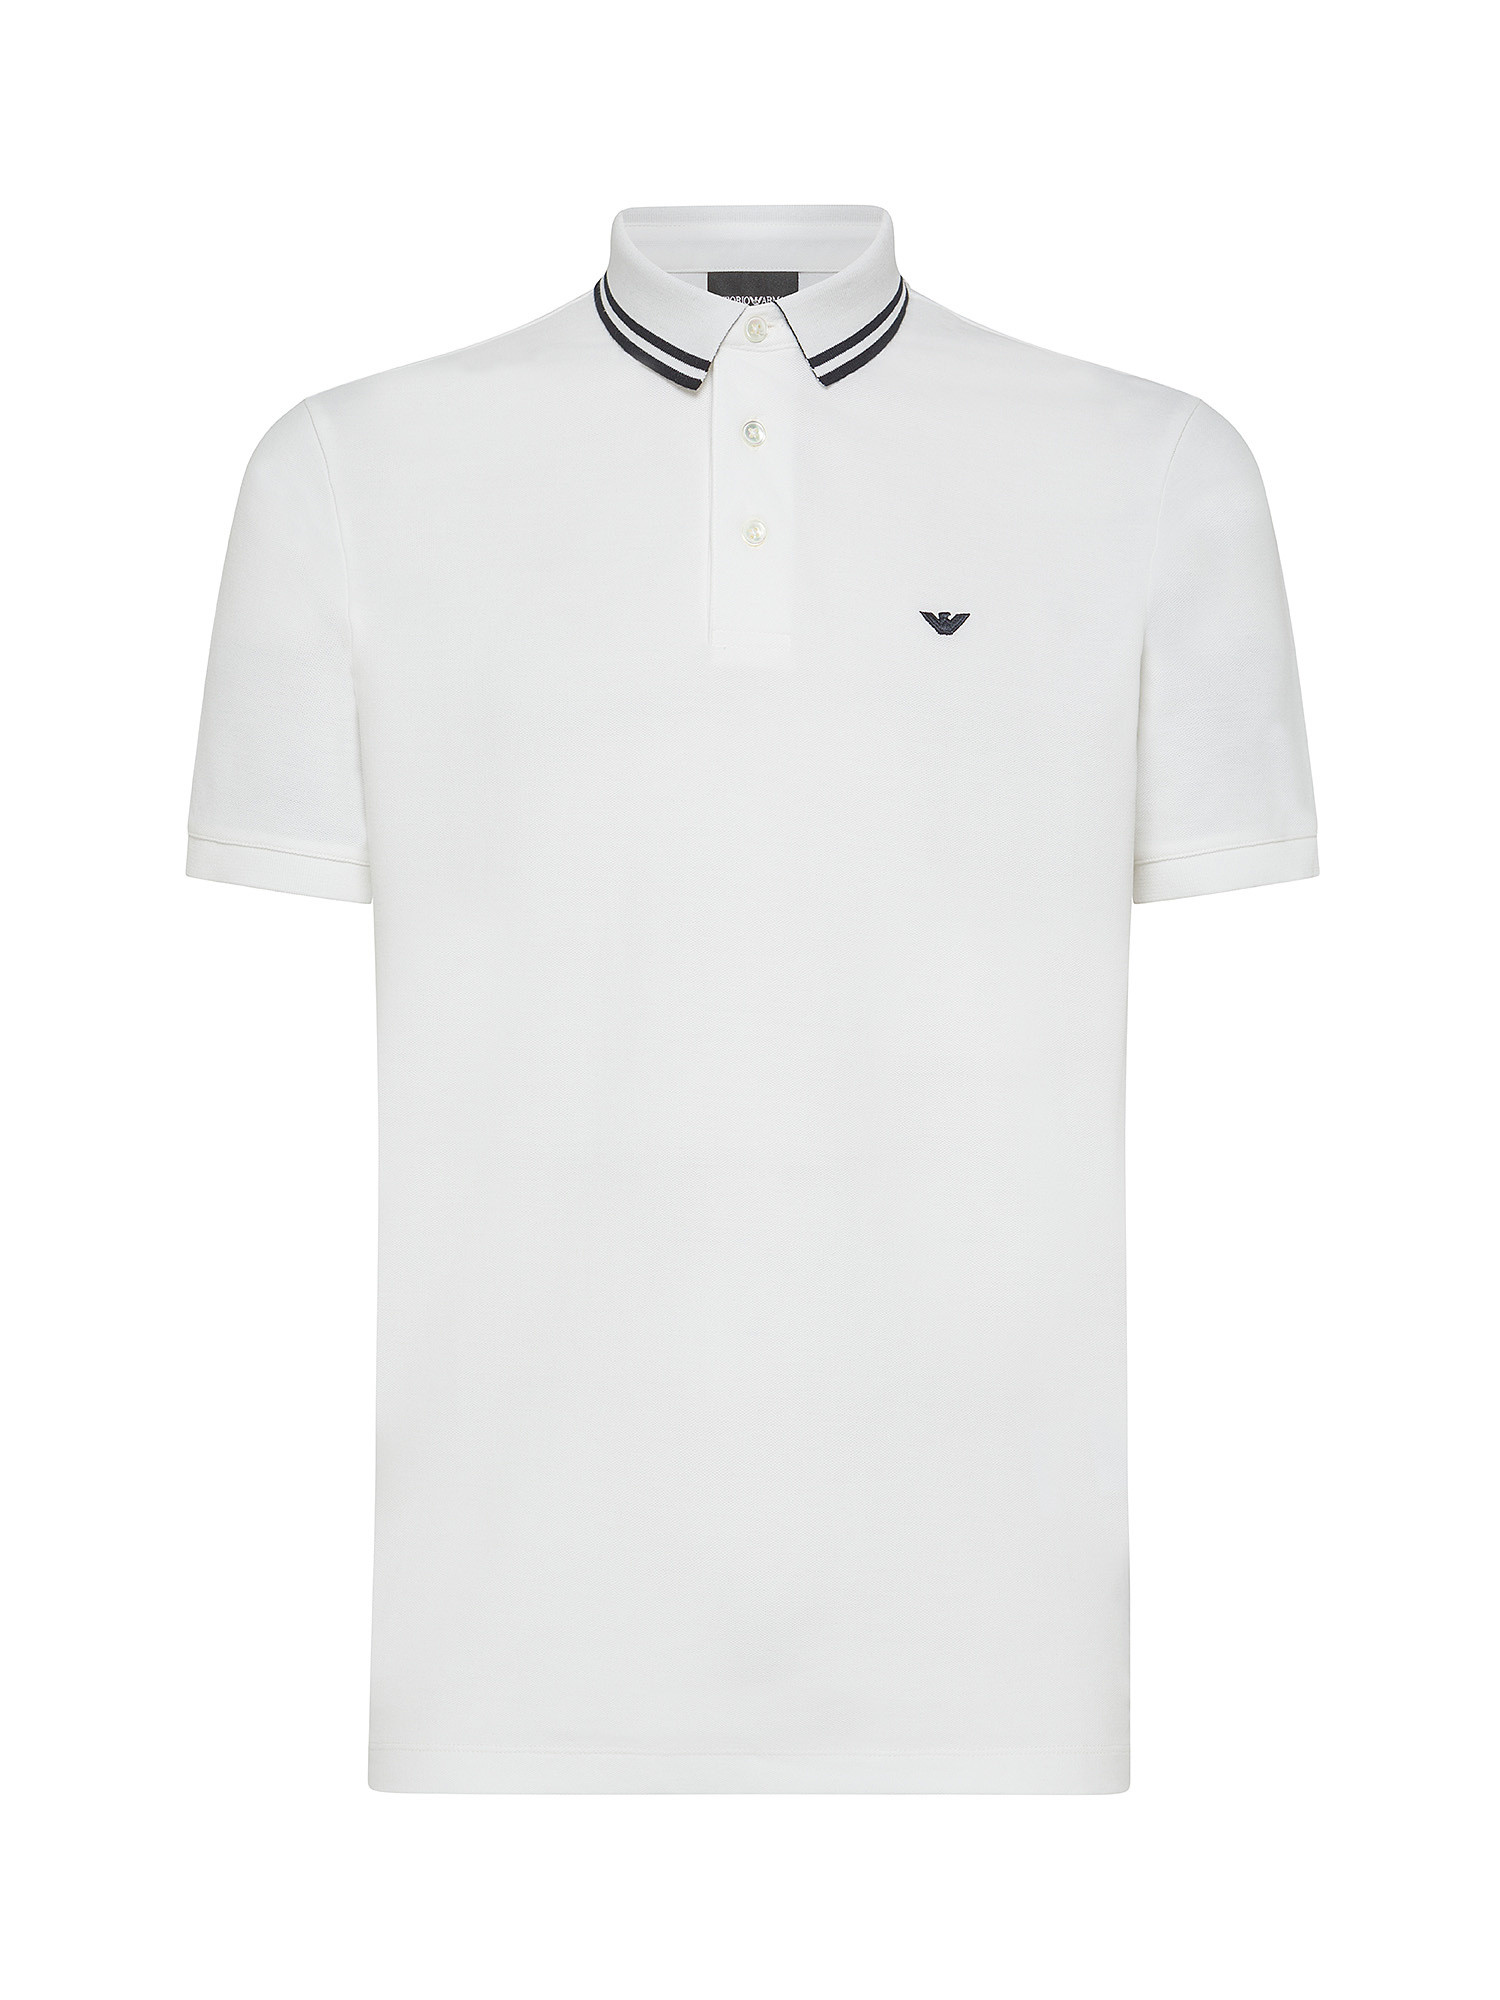 Emporio Armani - Cotton polo shirt with embroidered logo, White, large image number 0